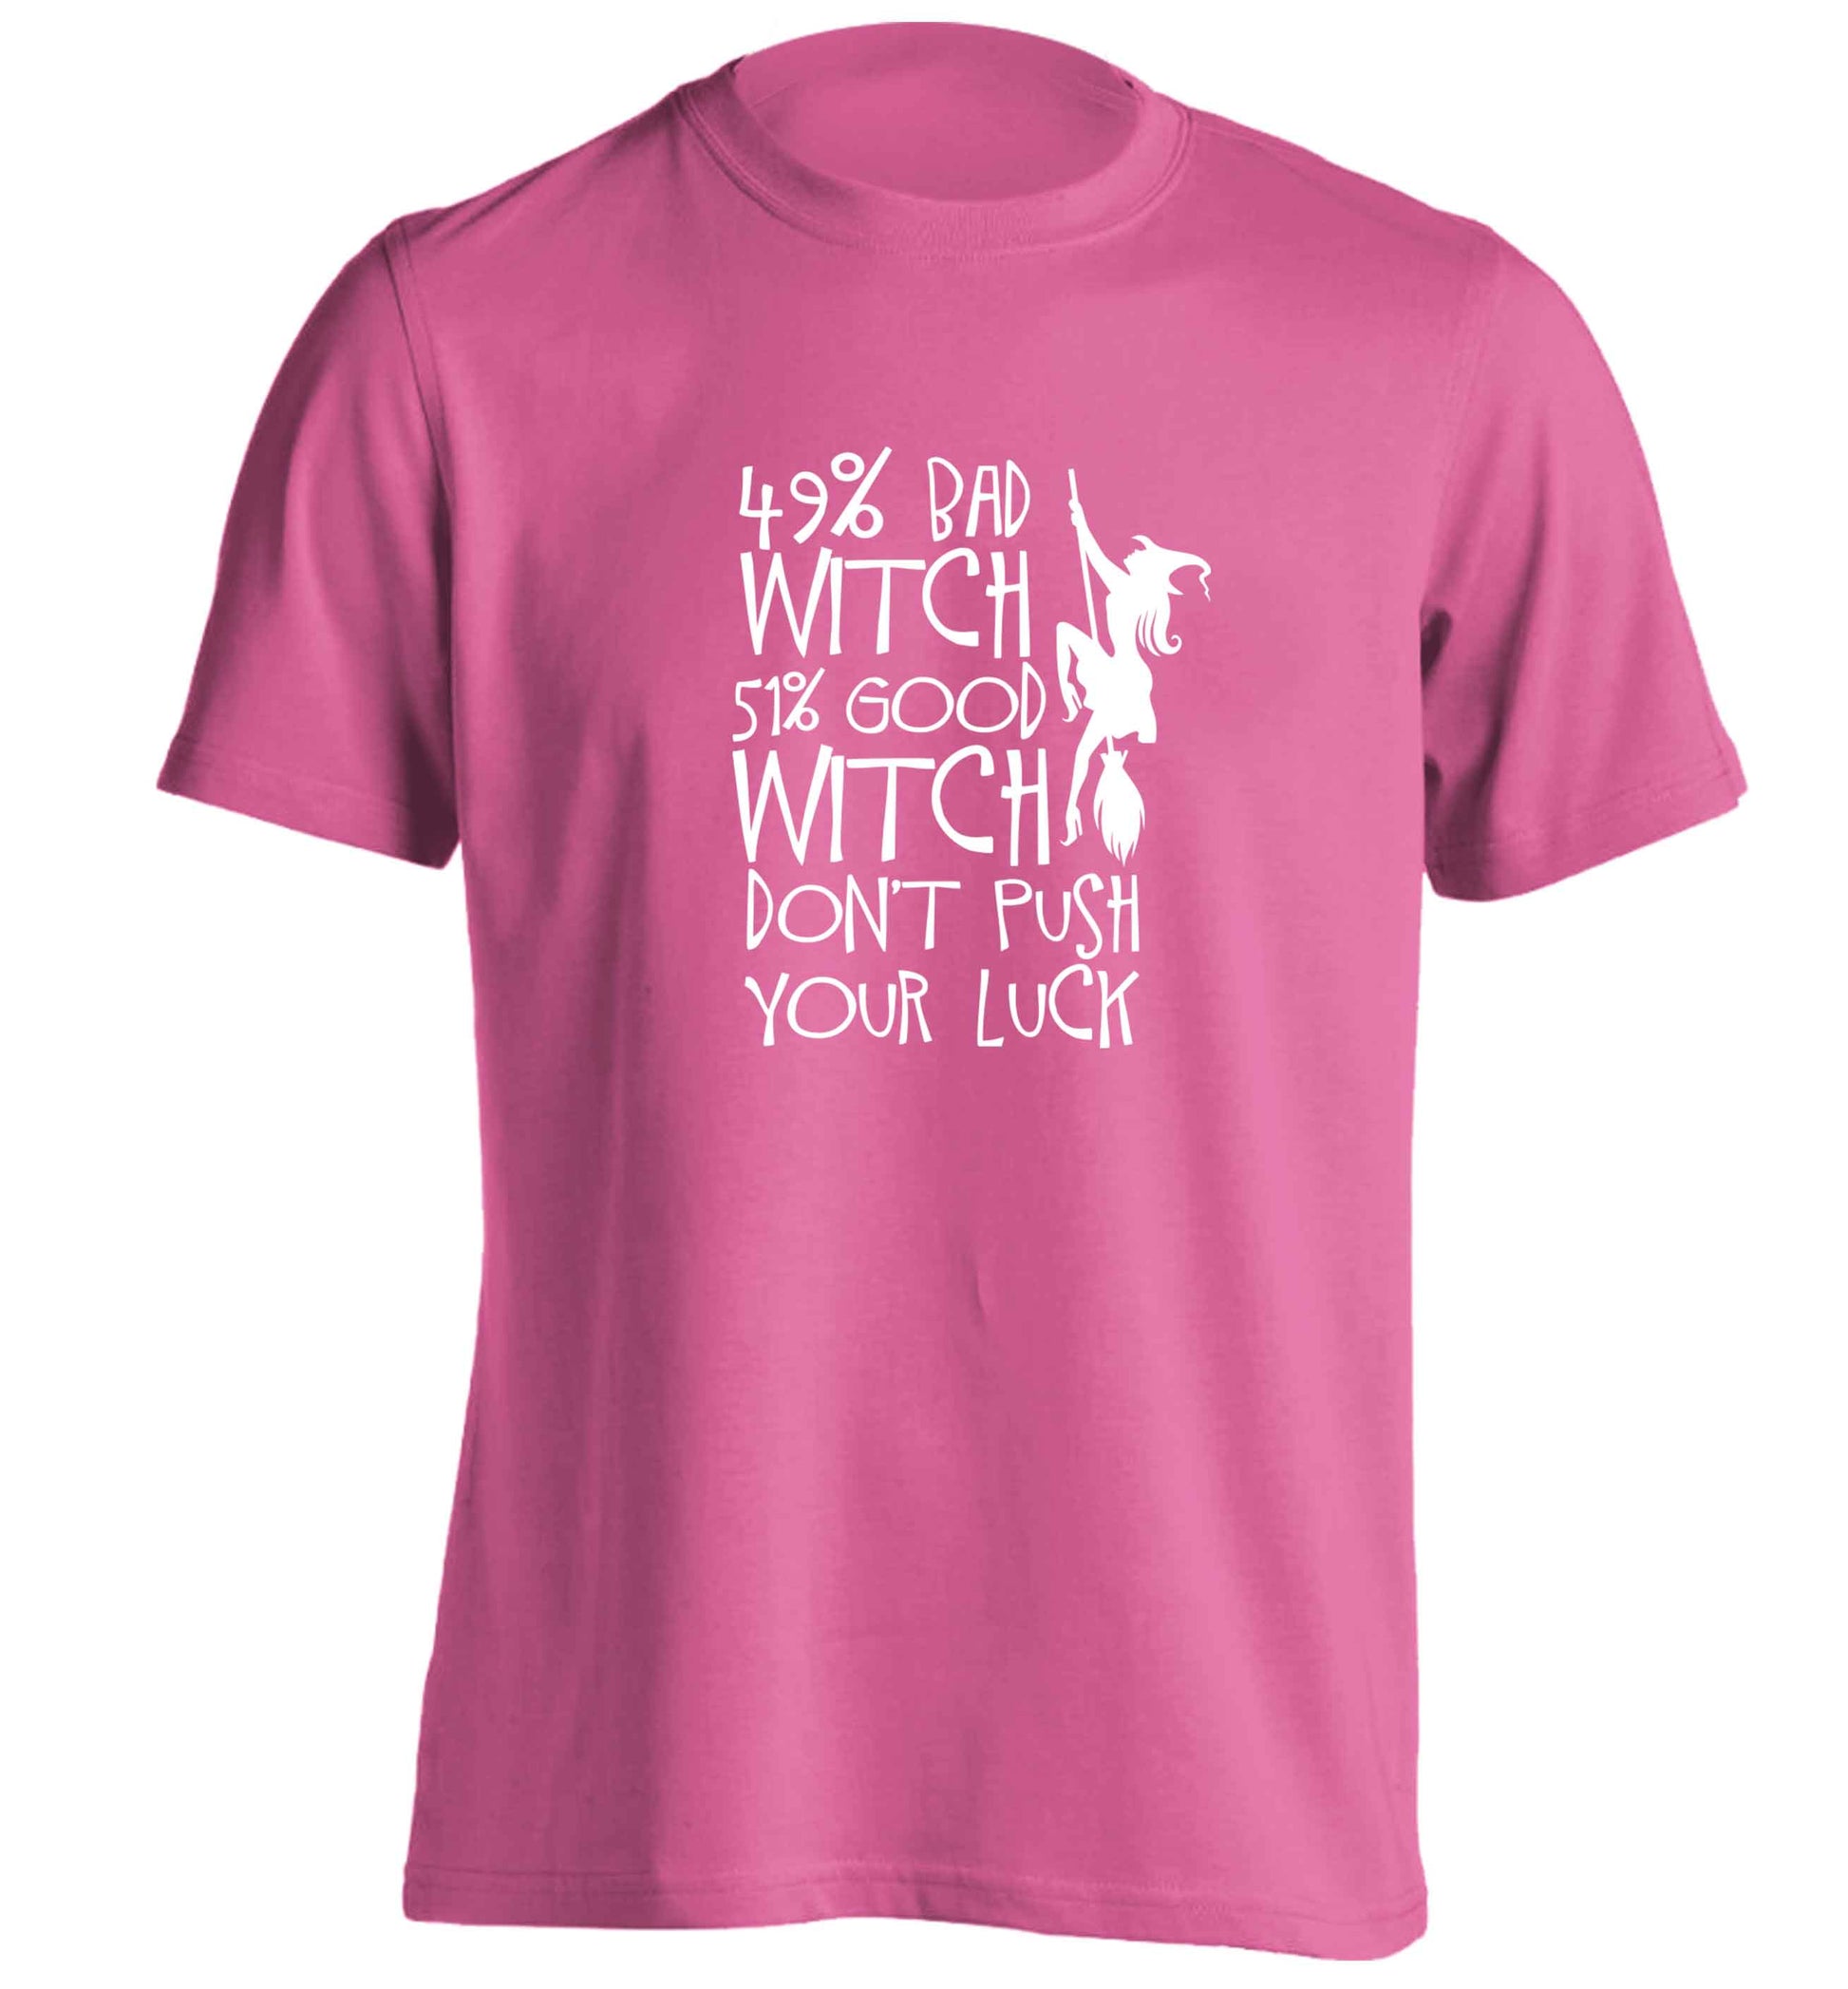 49% bad witch 51% good witch don't push your luck adults unisex pink Tshirt 2XL